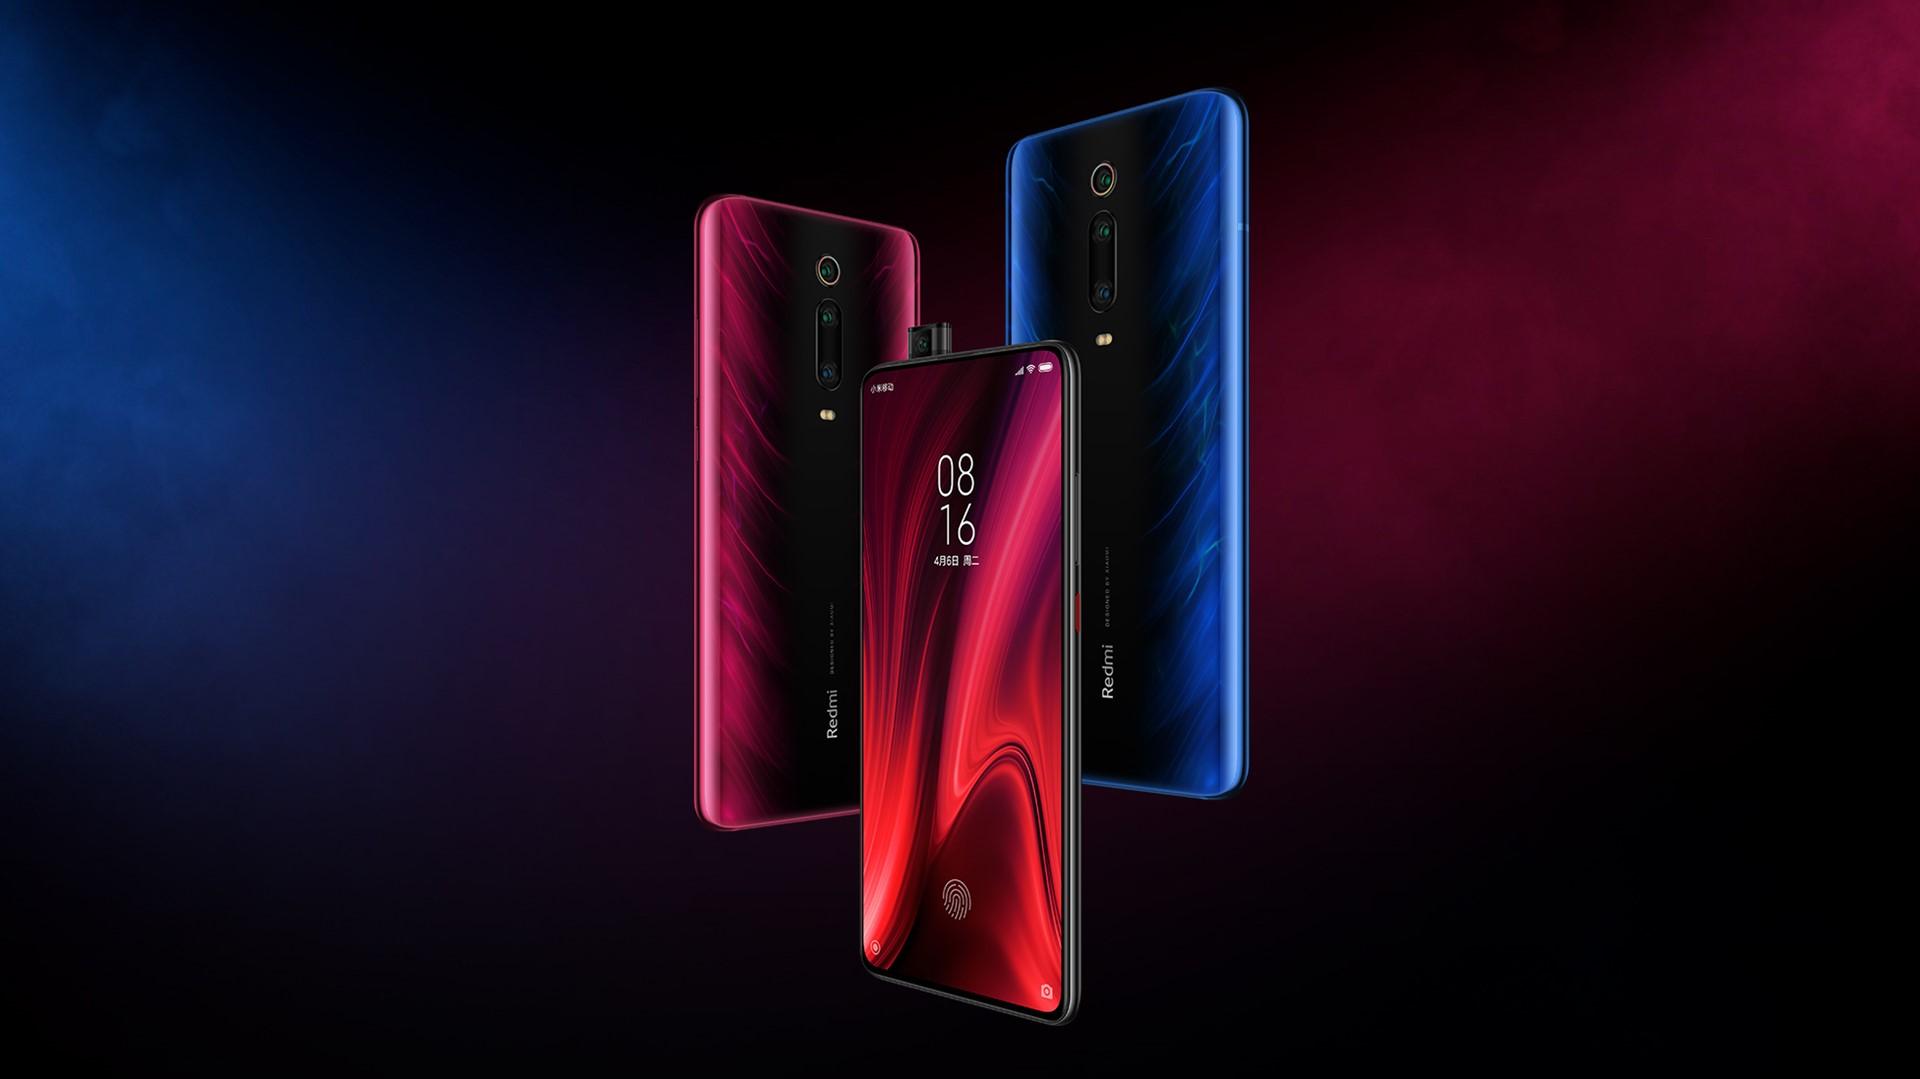 Xiaomi To Launch Redmi K20 Series In India On July